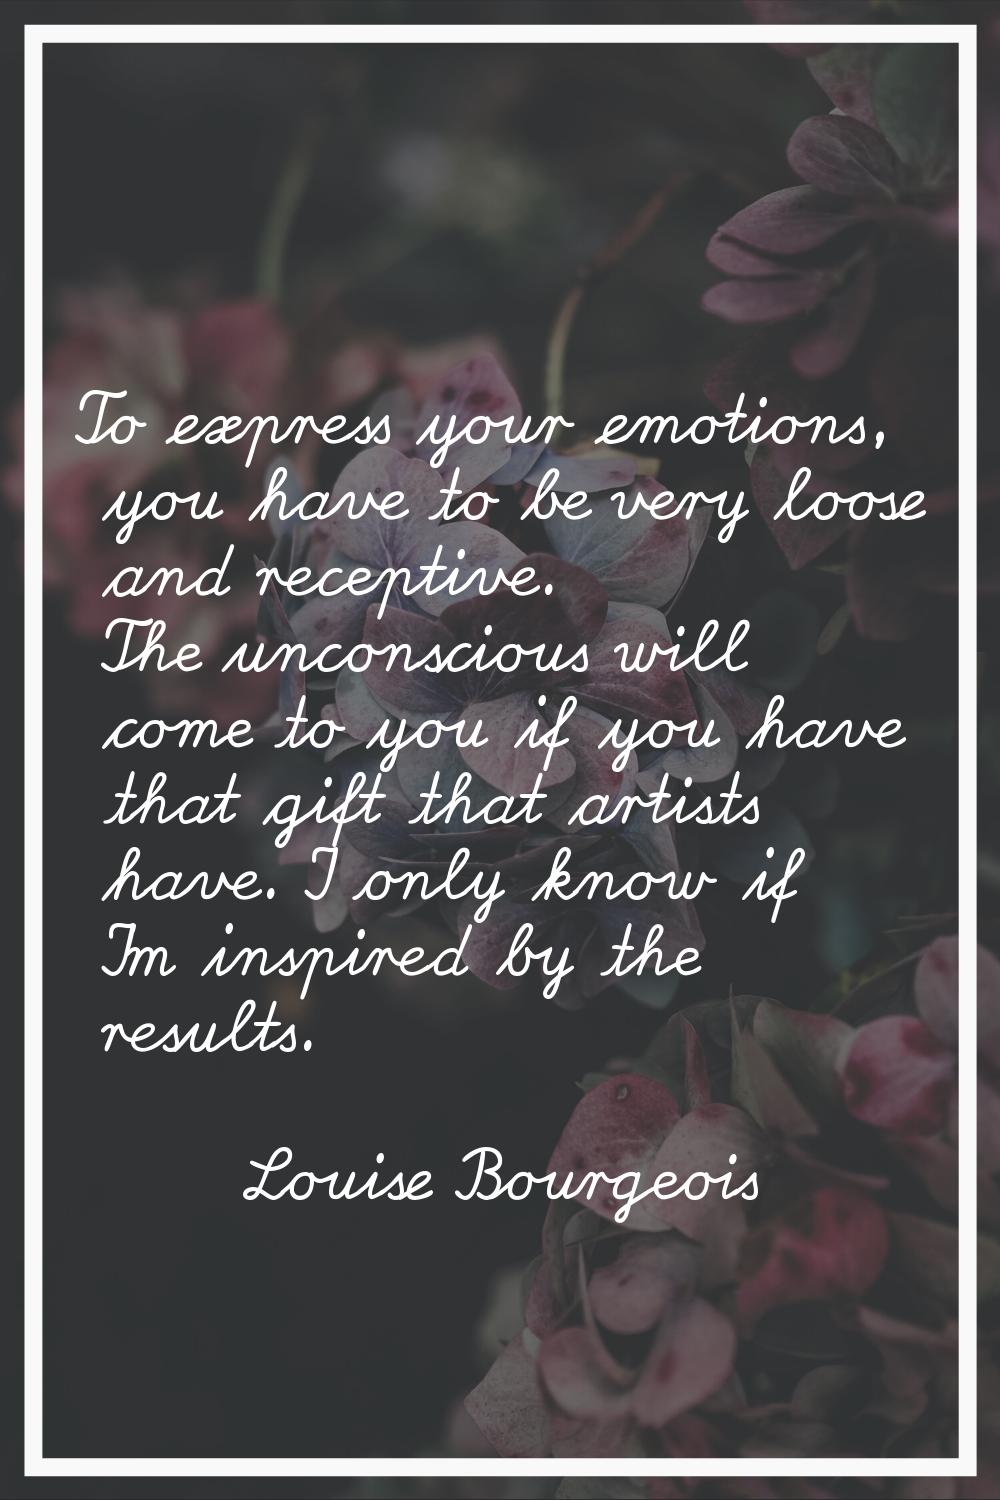 To express your emotions, you have to be very loose and receptive. The unconscious will come to you